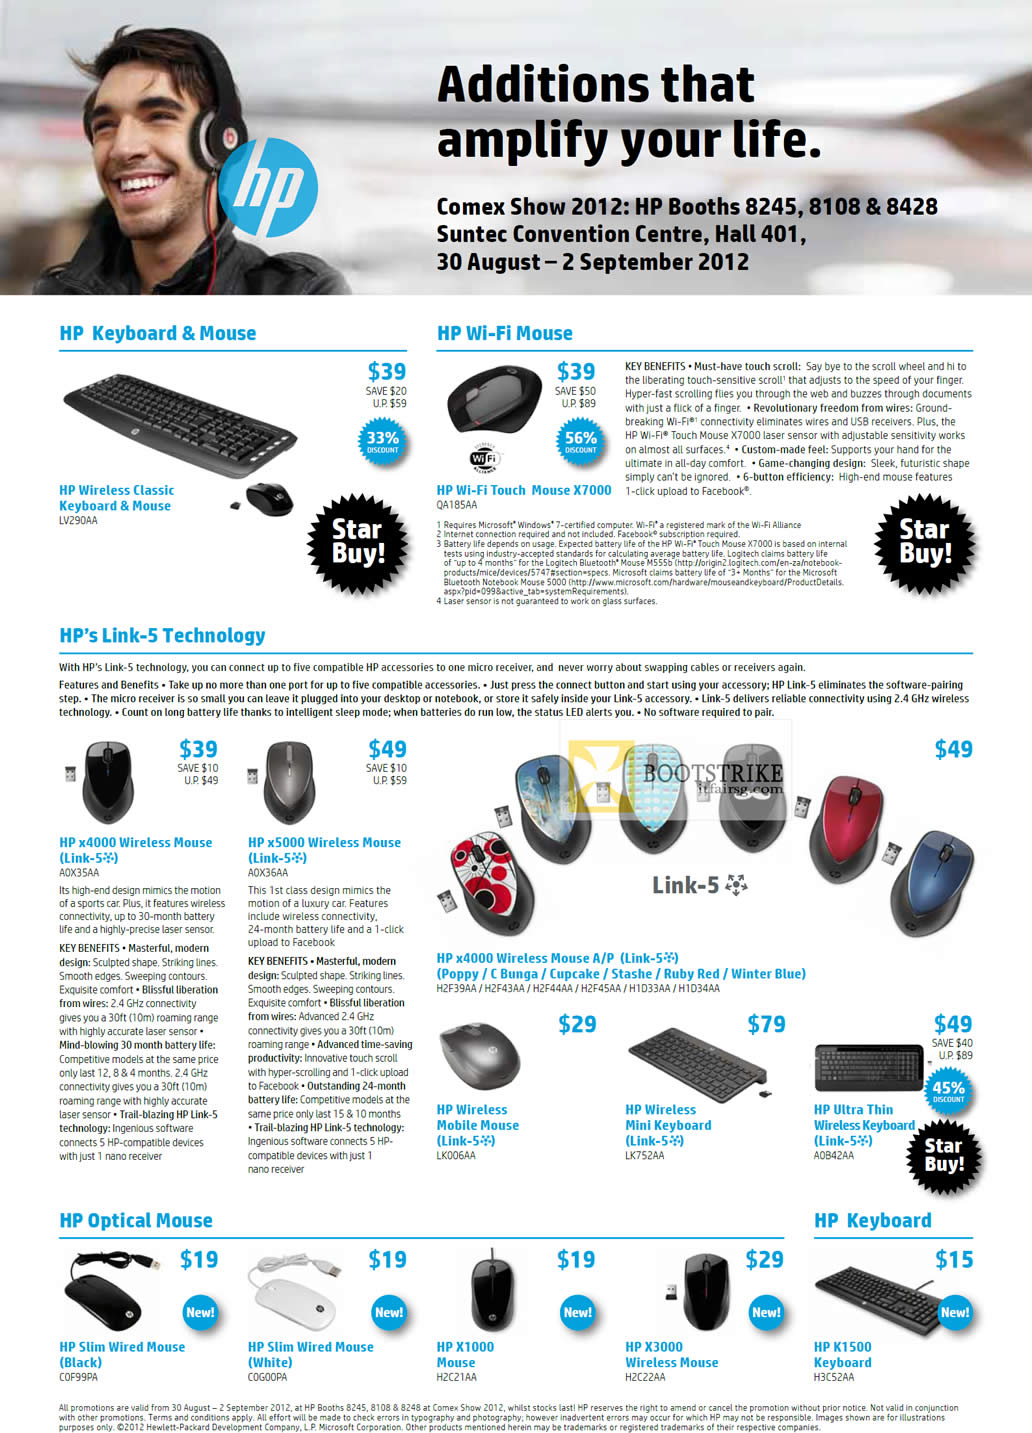 COMEX 2012 price list image brochure of HP Accessories Keyboard, Mouse, Wi-Fi Touch Mouse X7000, X4000, X5000 Link-5, Optical Mouse, Keyboard